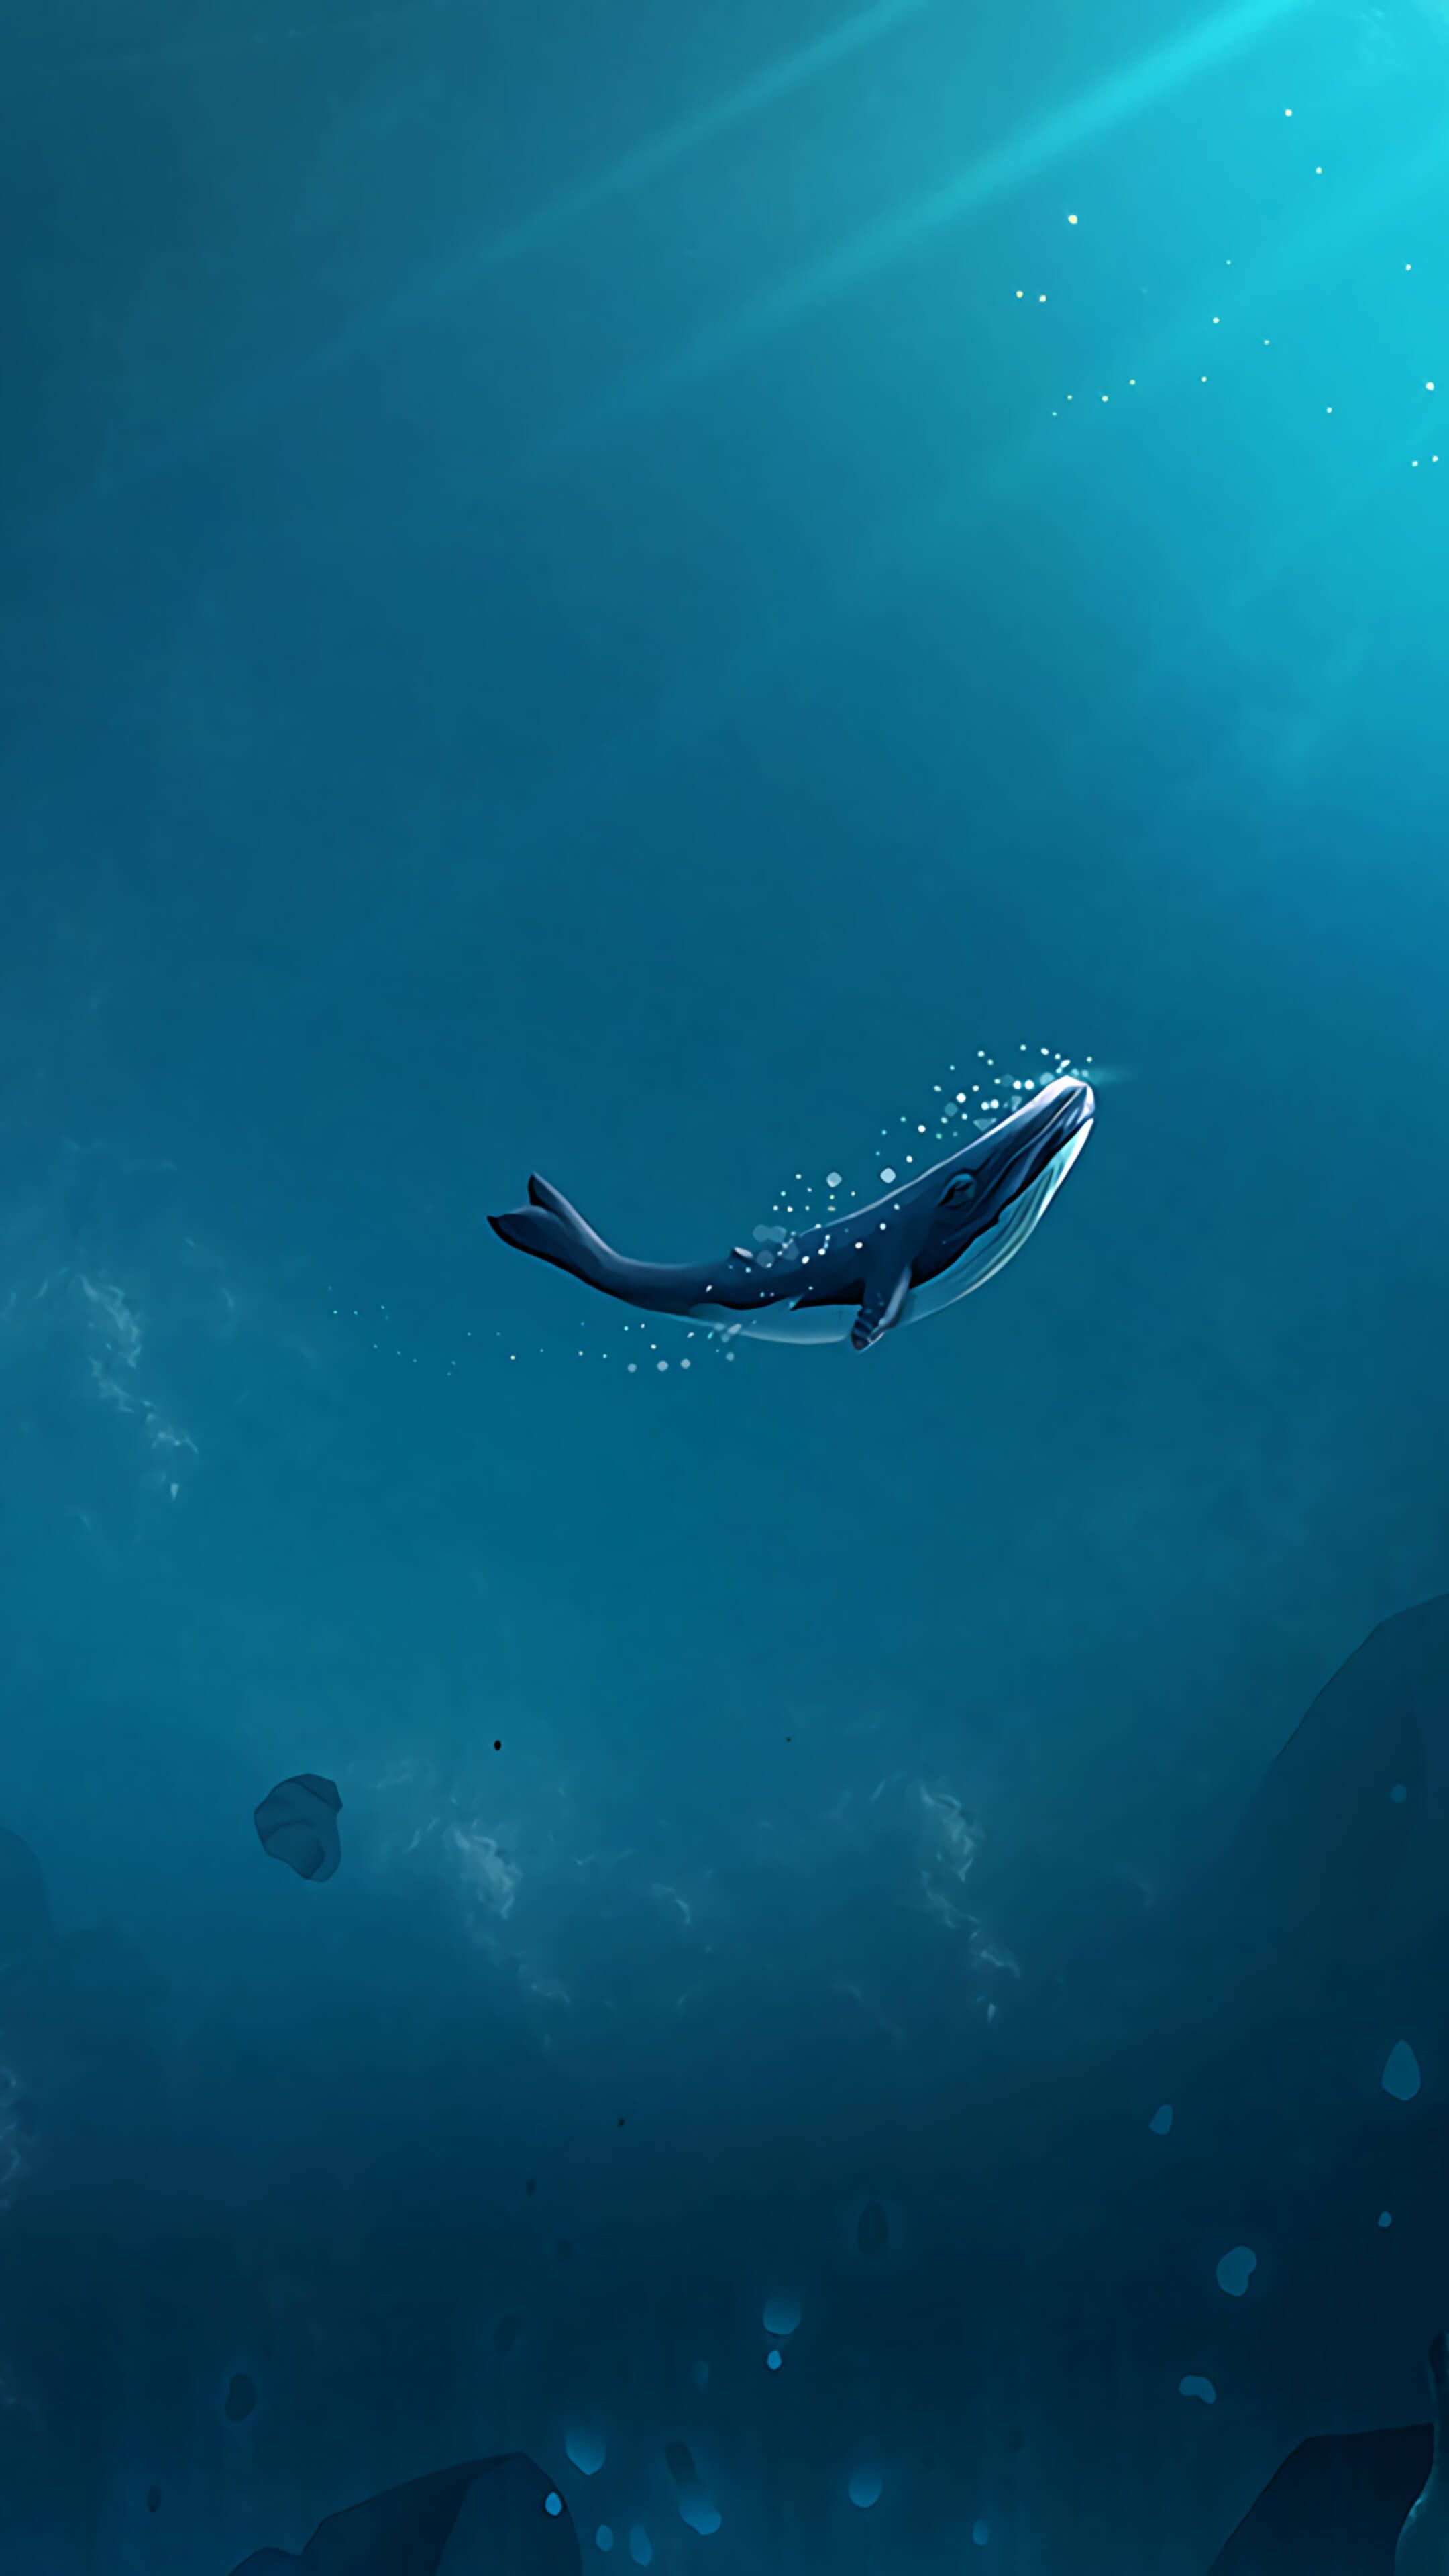 A whale swimming in the ocean - Underwater